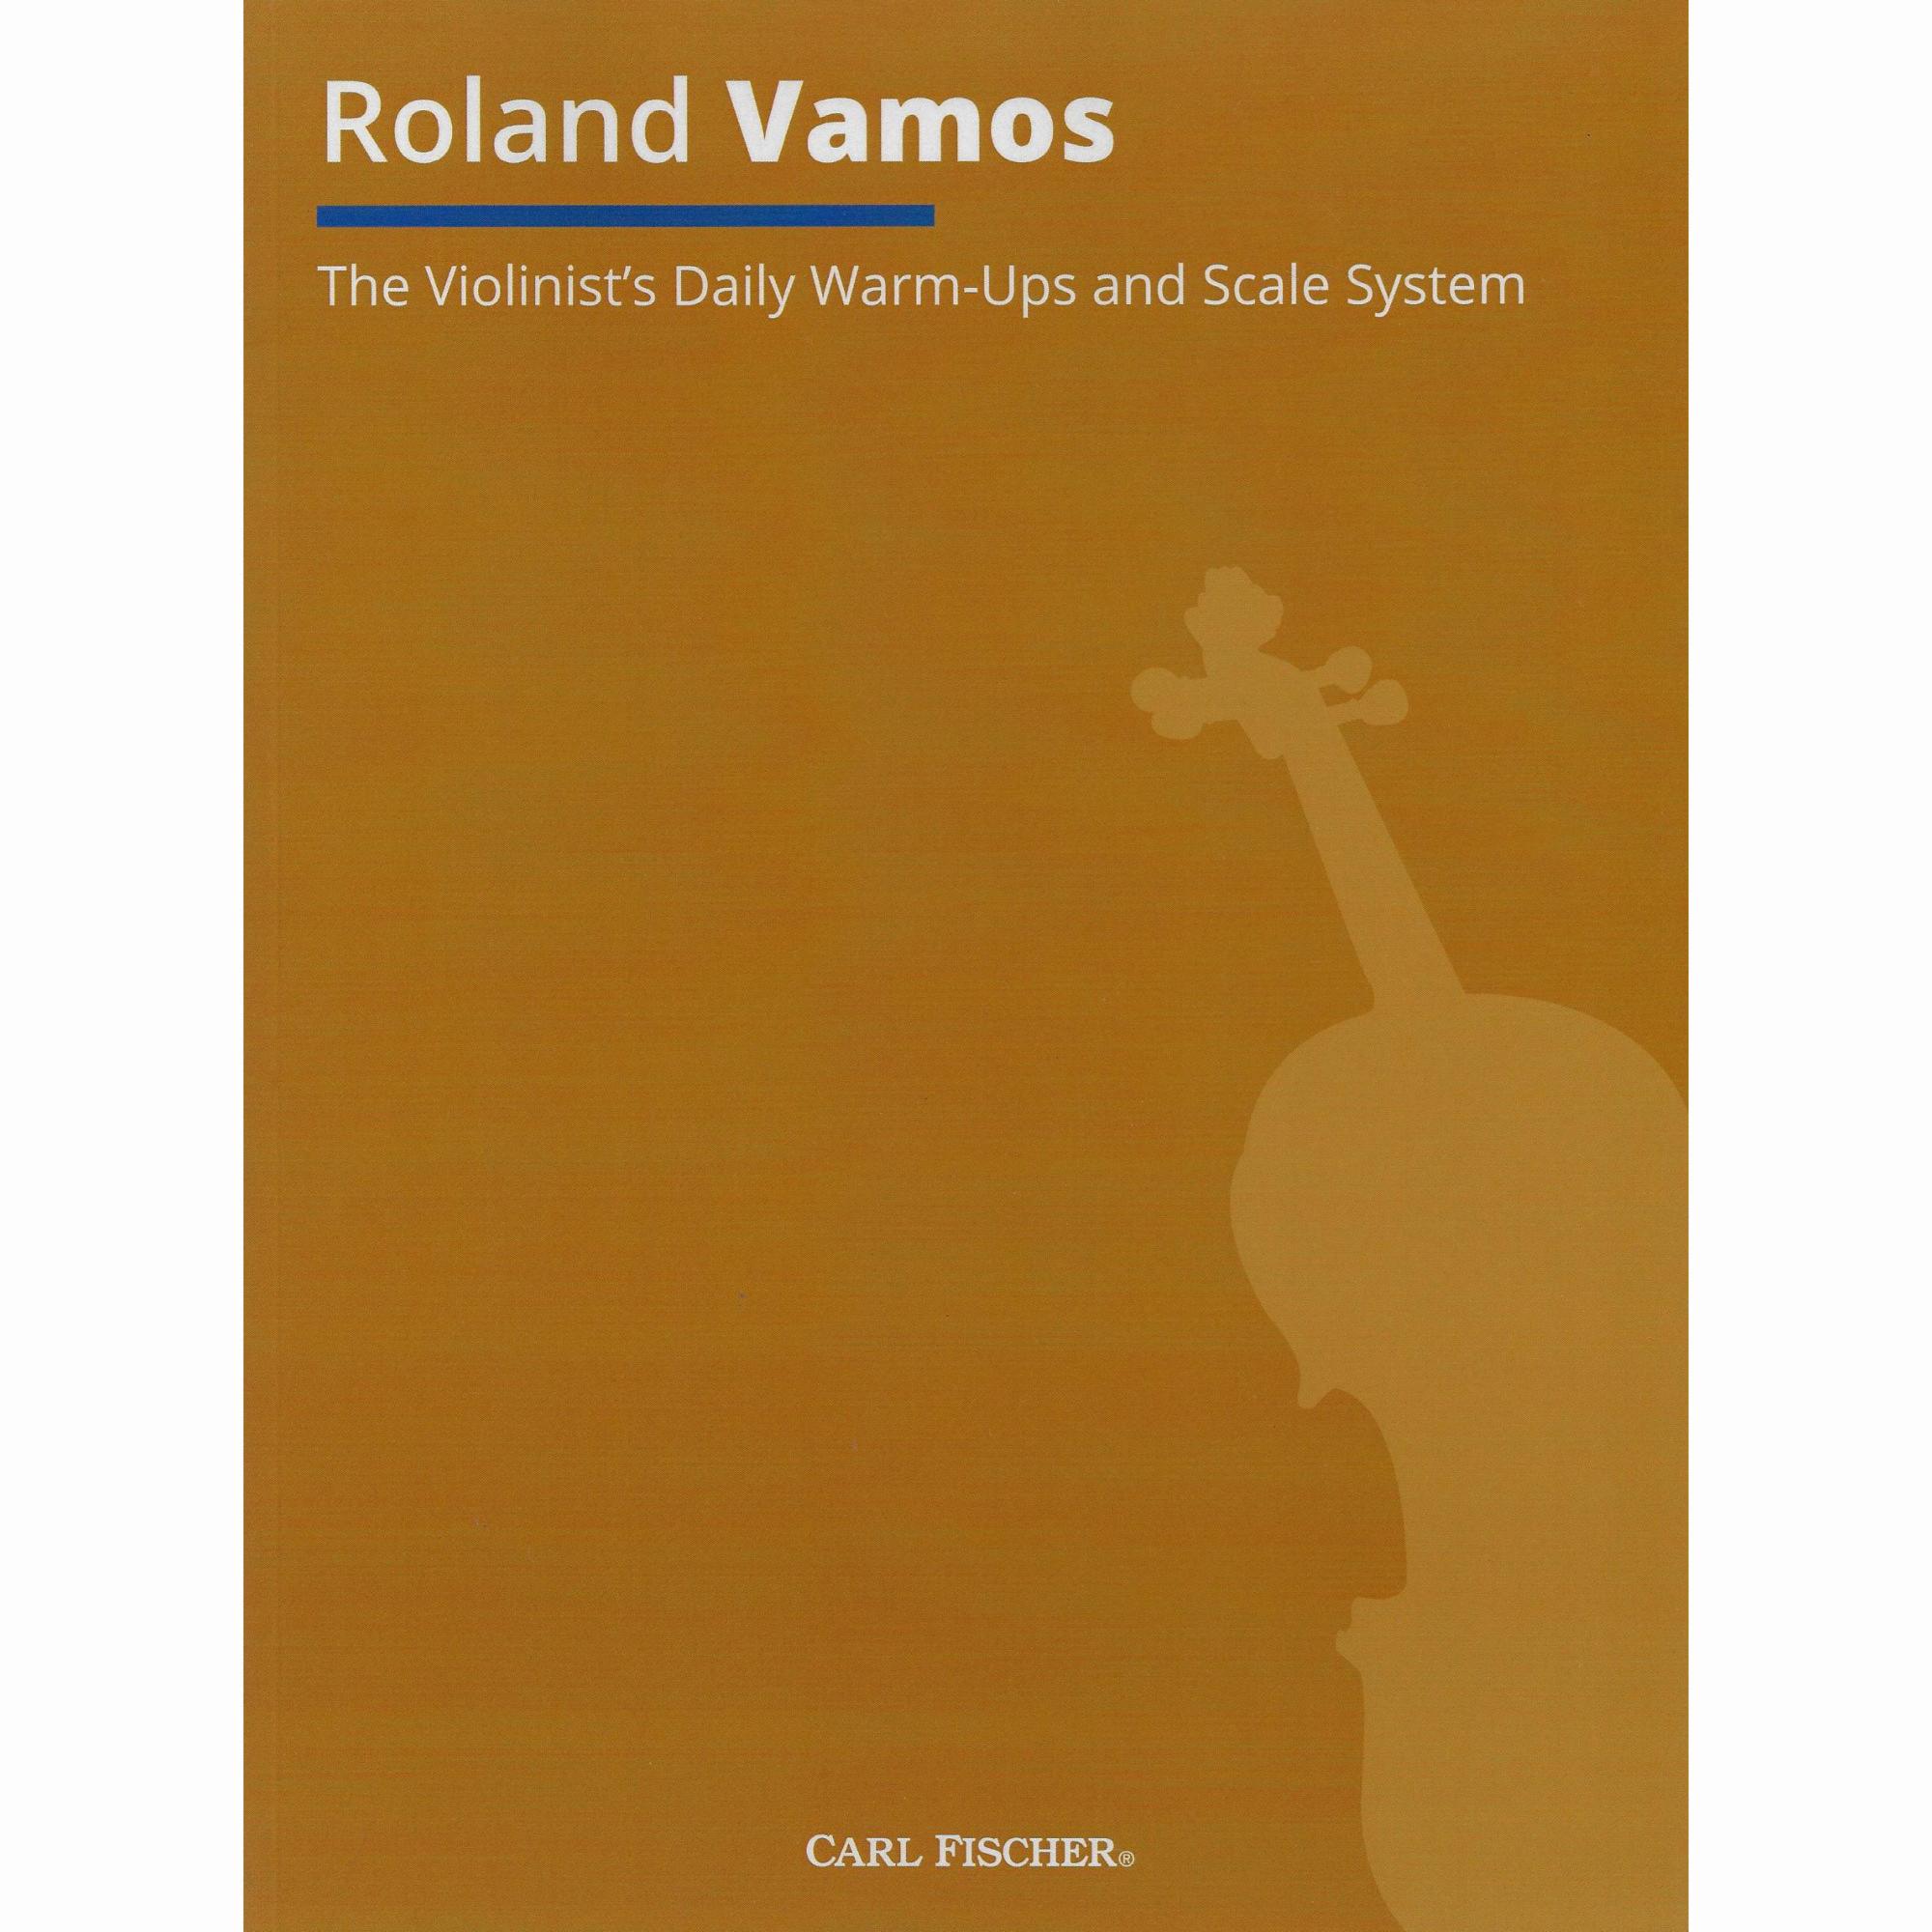 Vamos -- The Violinist's Daily Warm-ups and Scale System